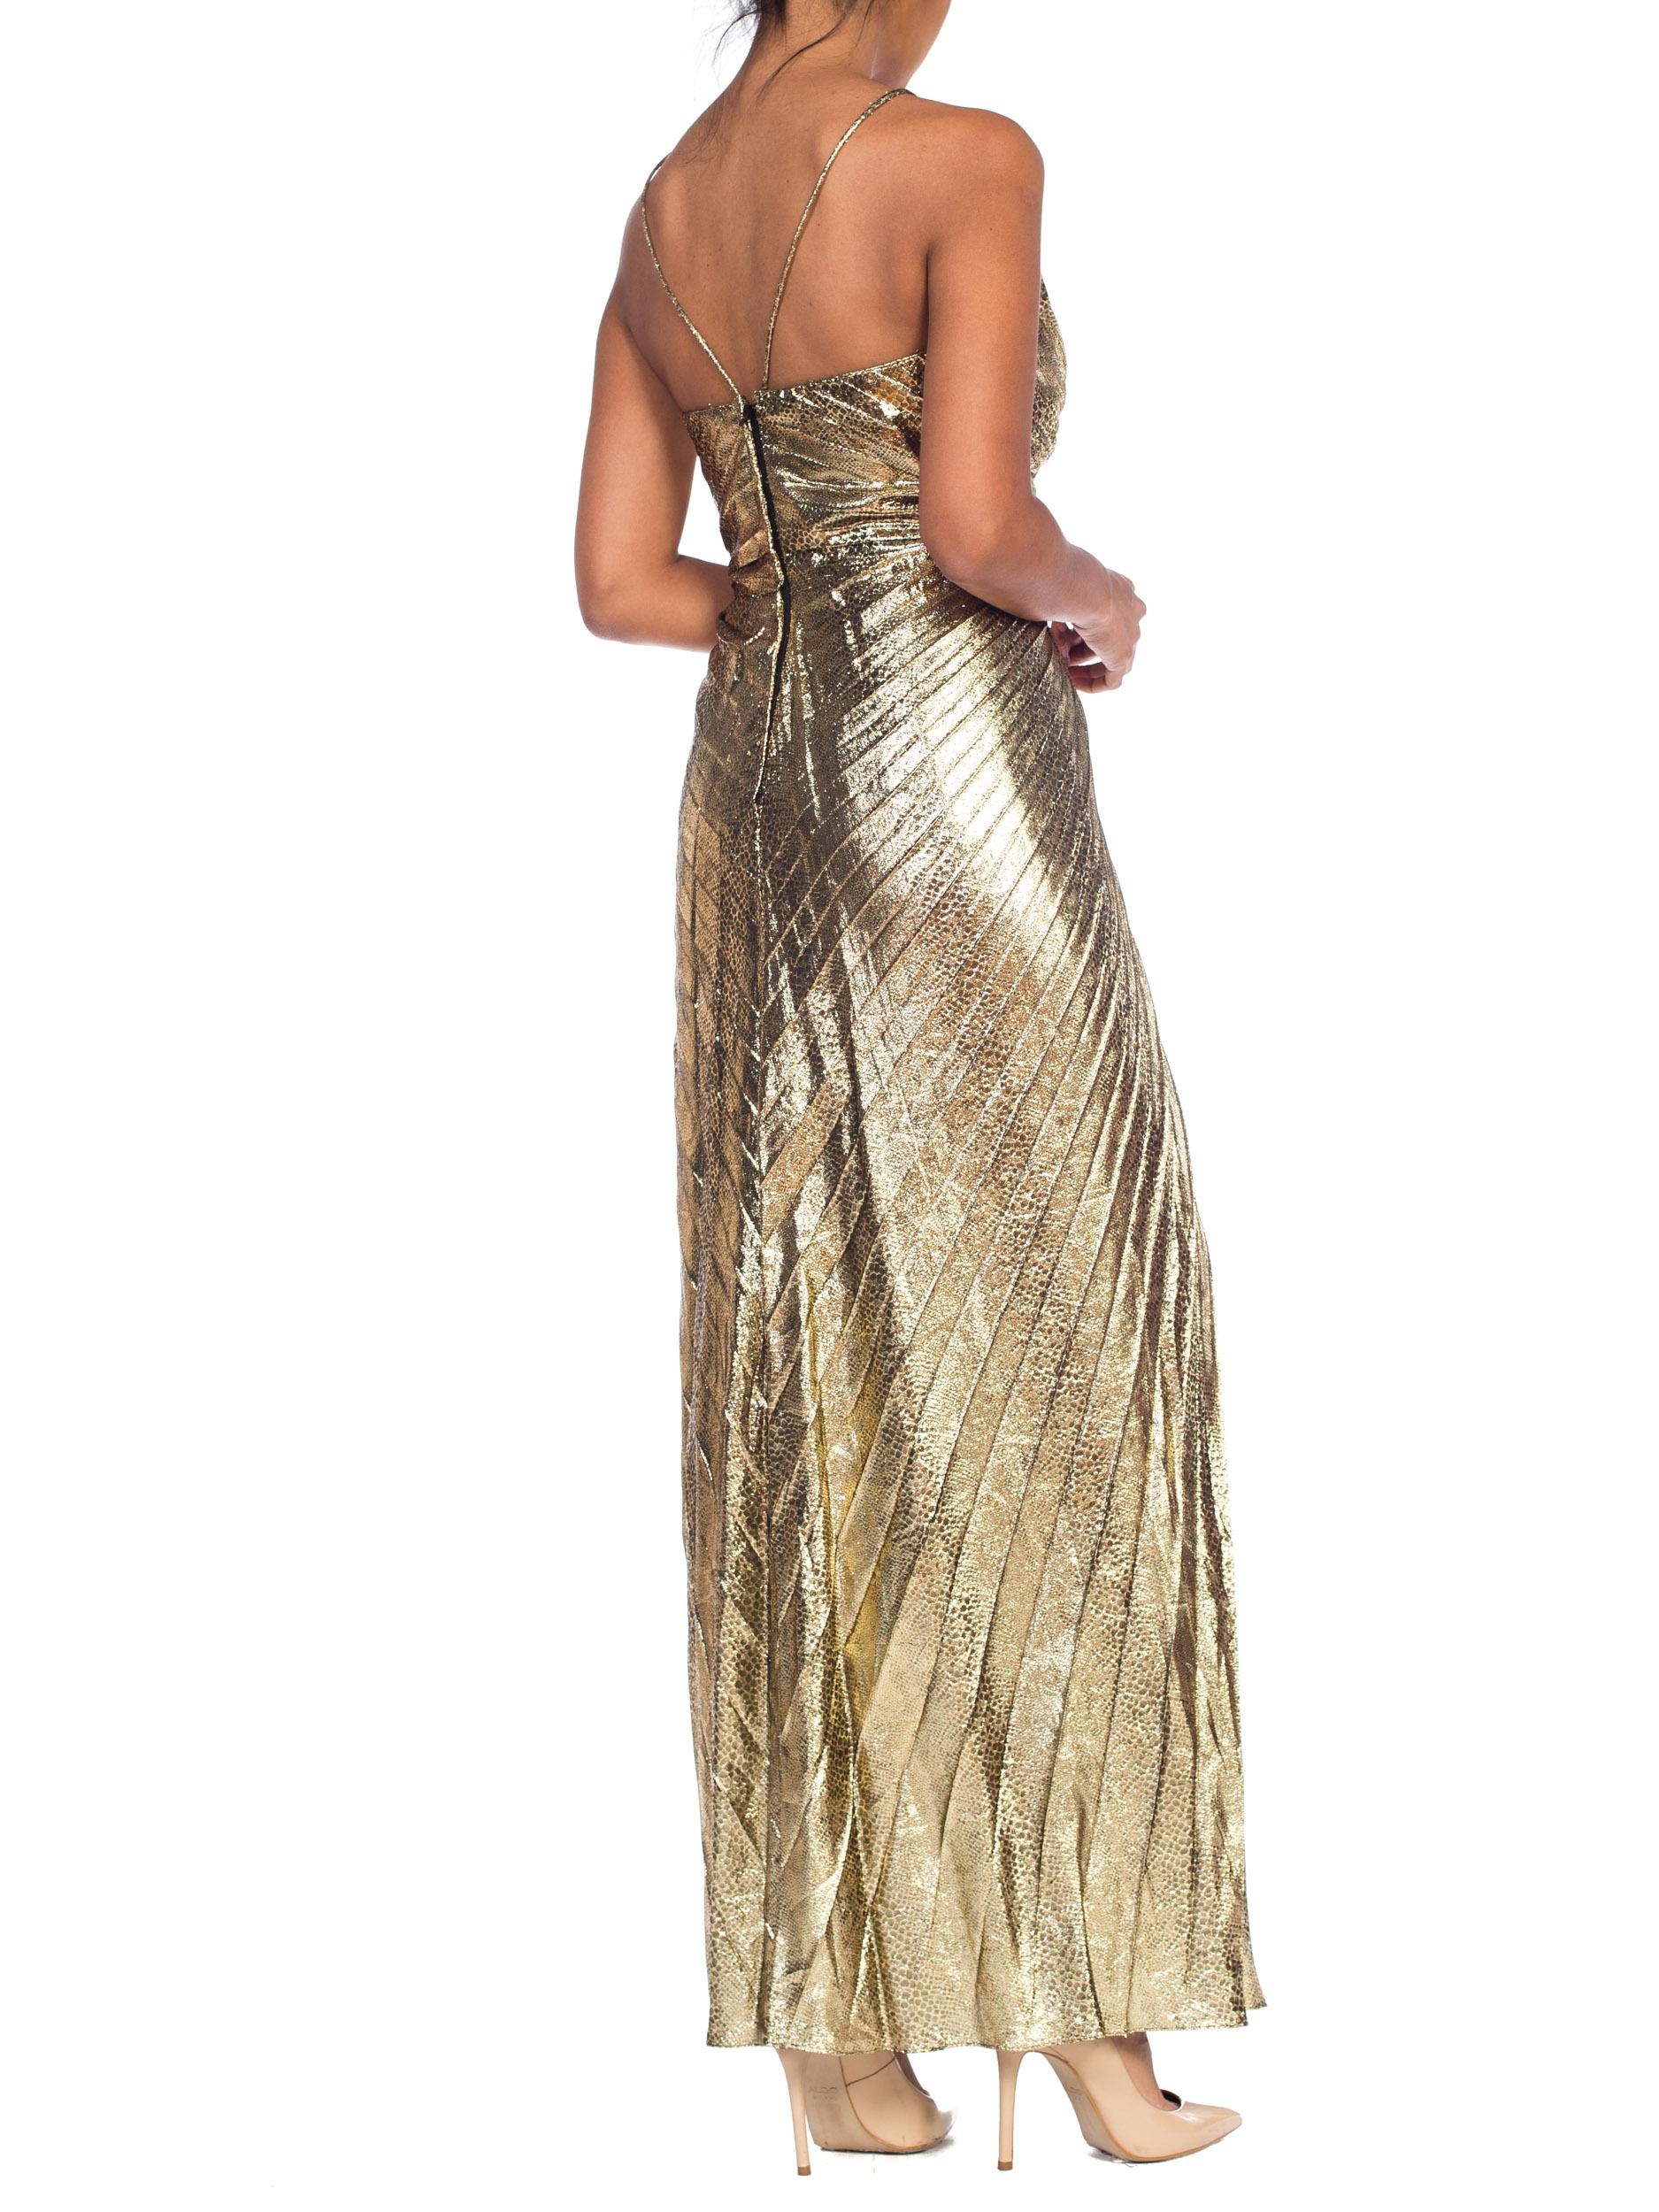 Iconic Travilla Gold Lamé Marilyn Monroe Disco Halter Gown 1